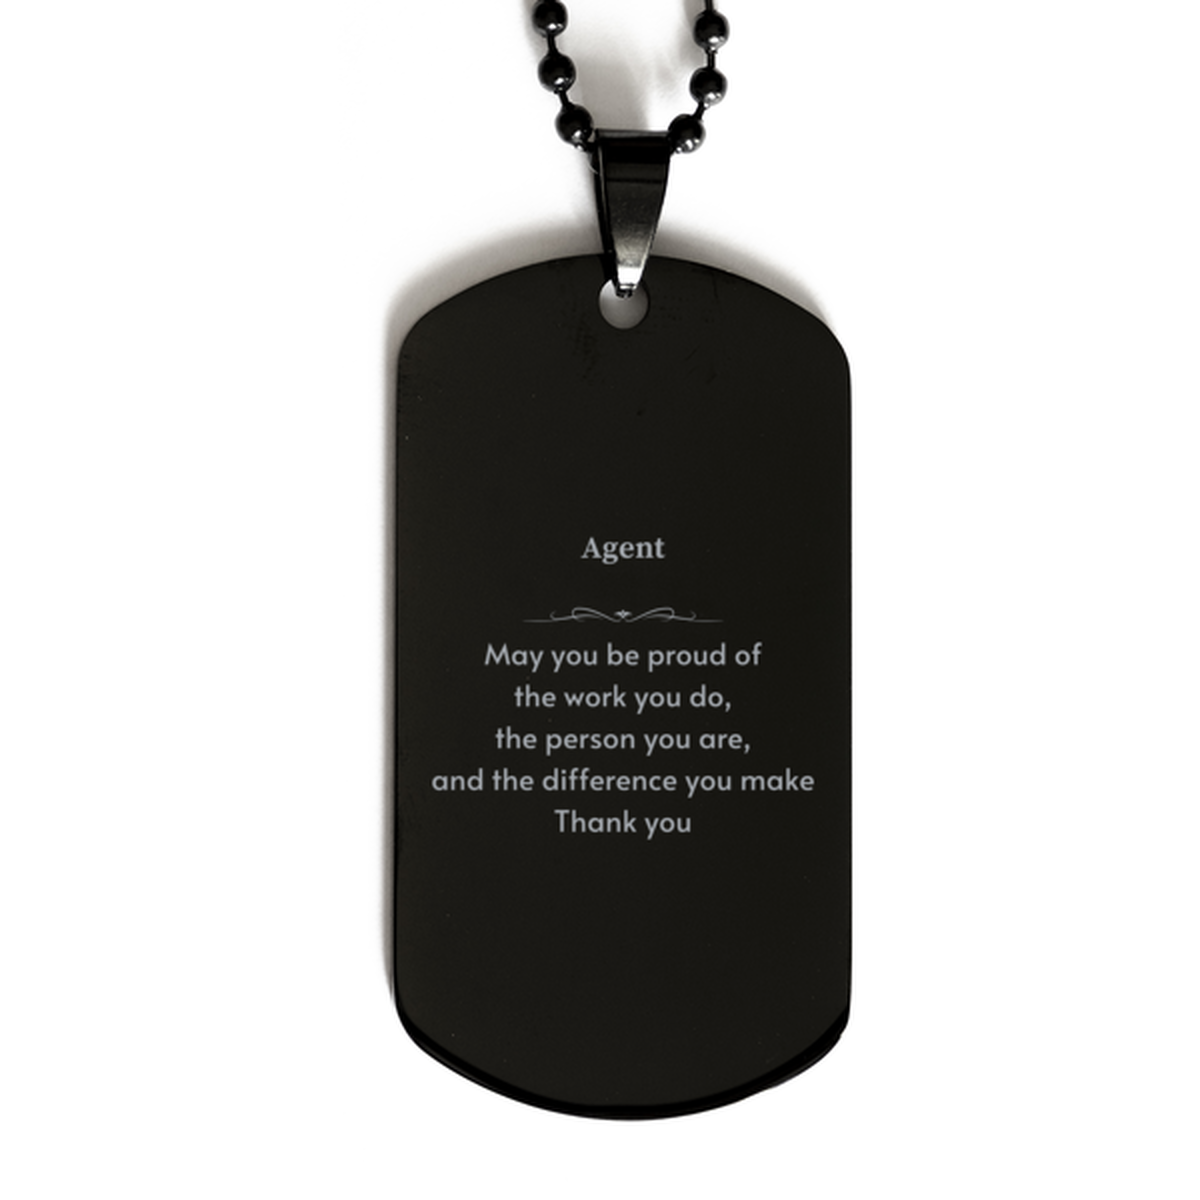 Heartwarming Black Dog Tag Retirement Coworkers Gifts for Agent, Agent May You be proud of the work you do, the person you are Gifts for Boss Men Women Friends